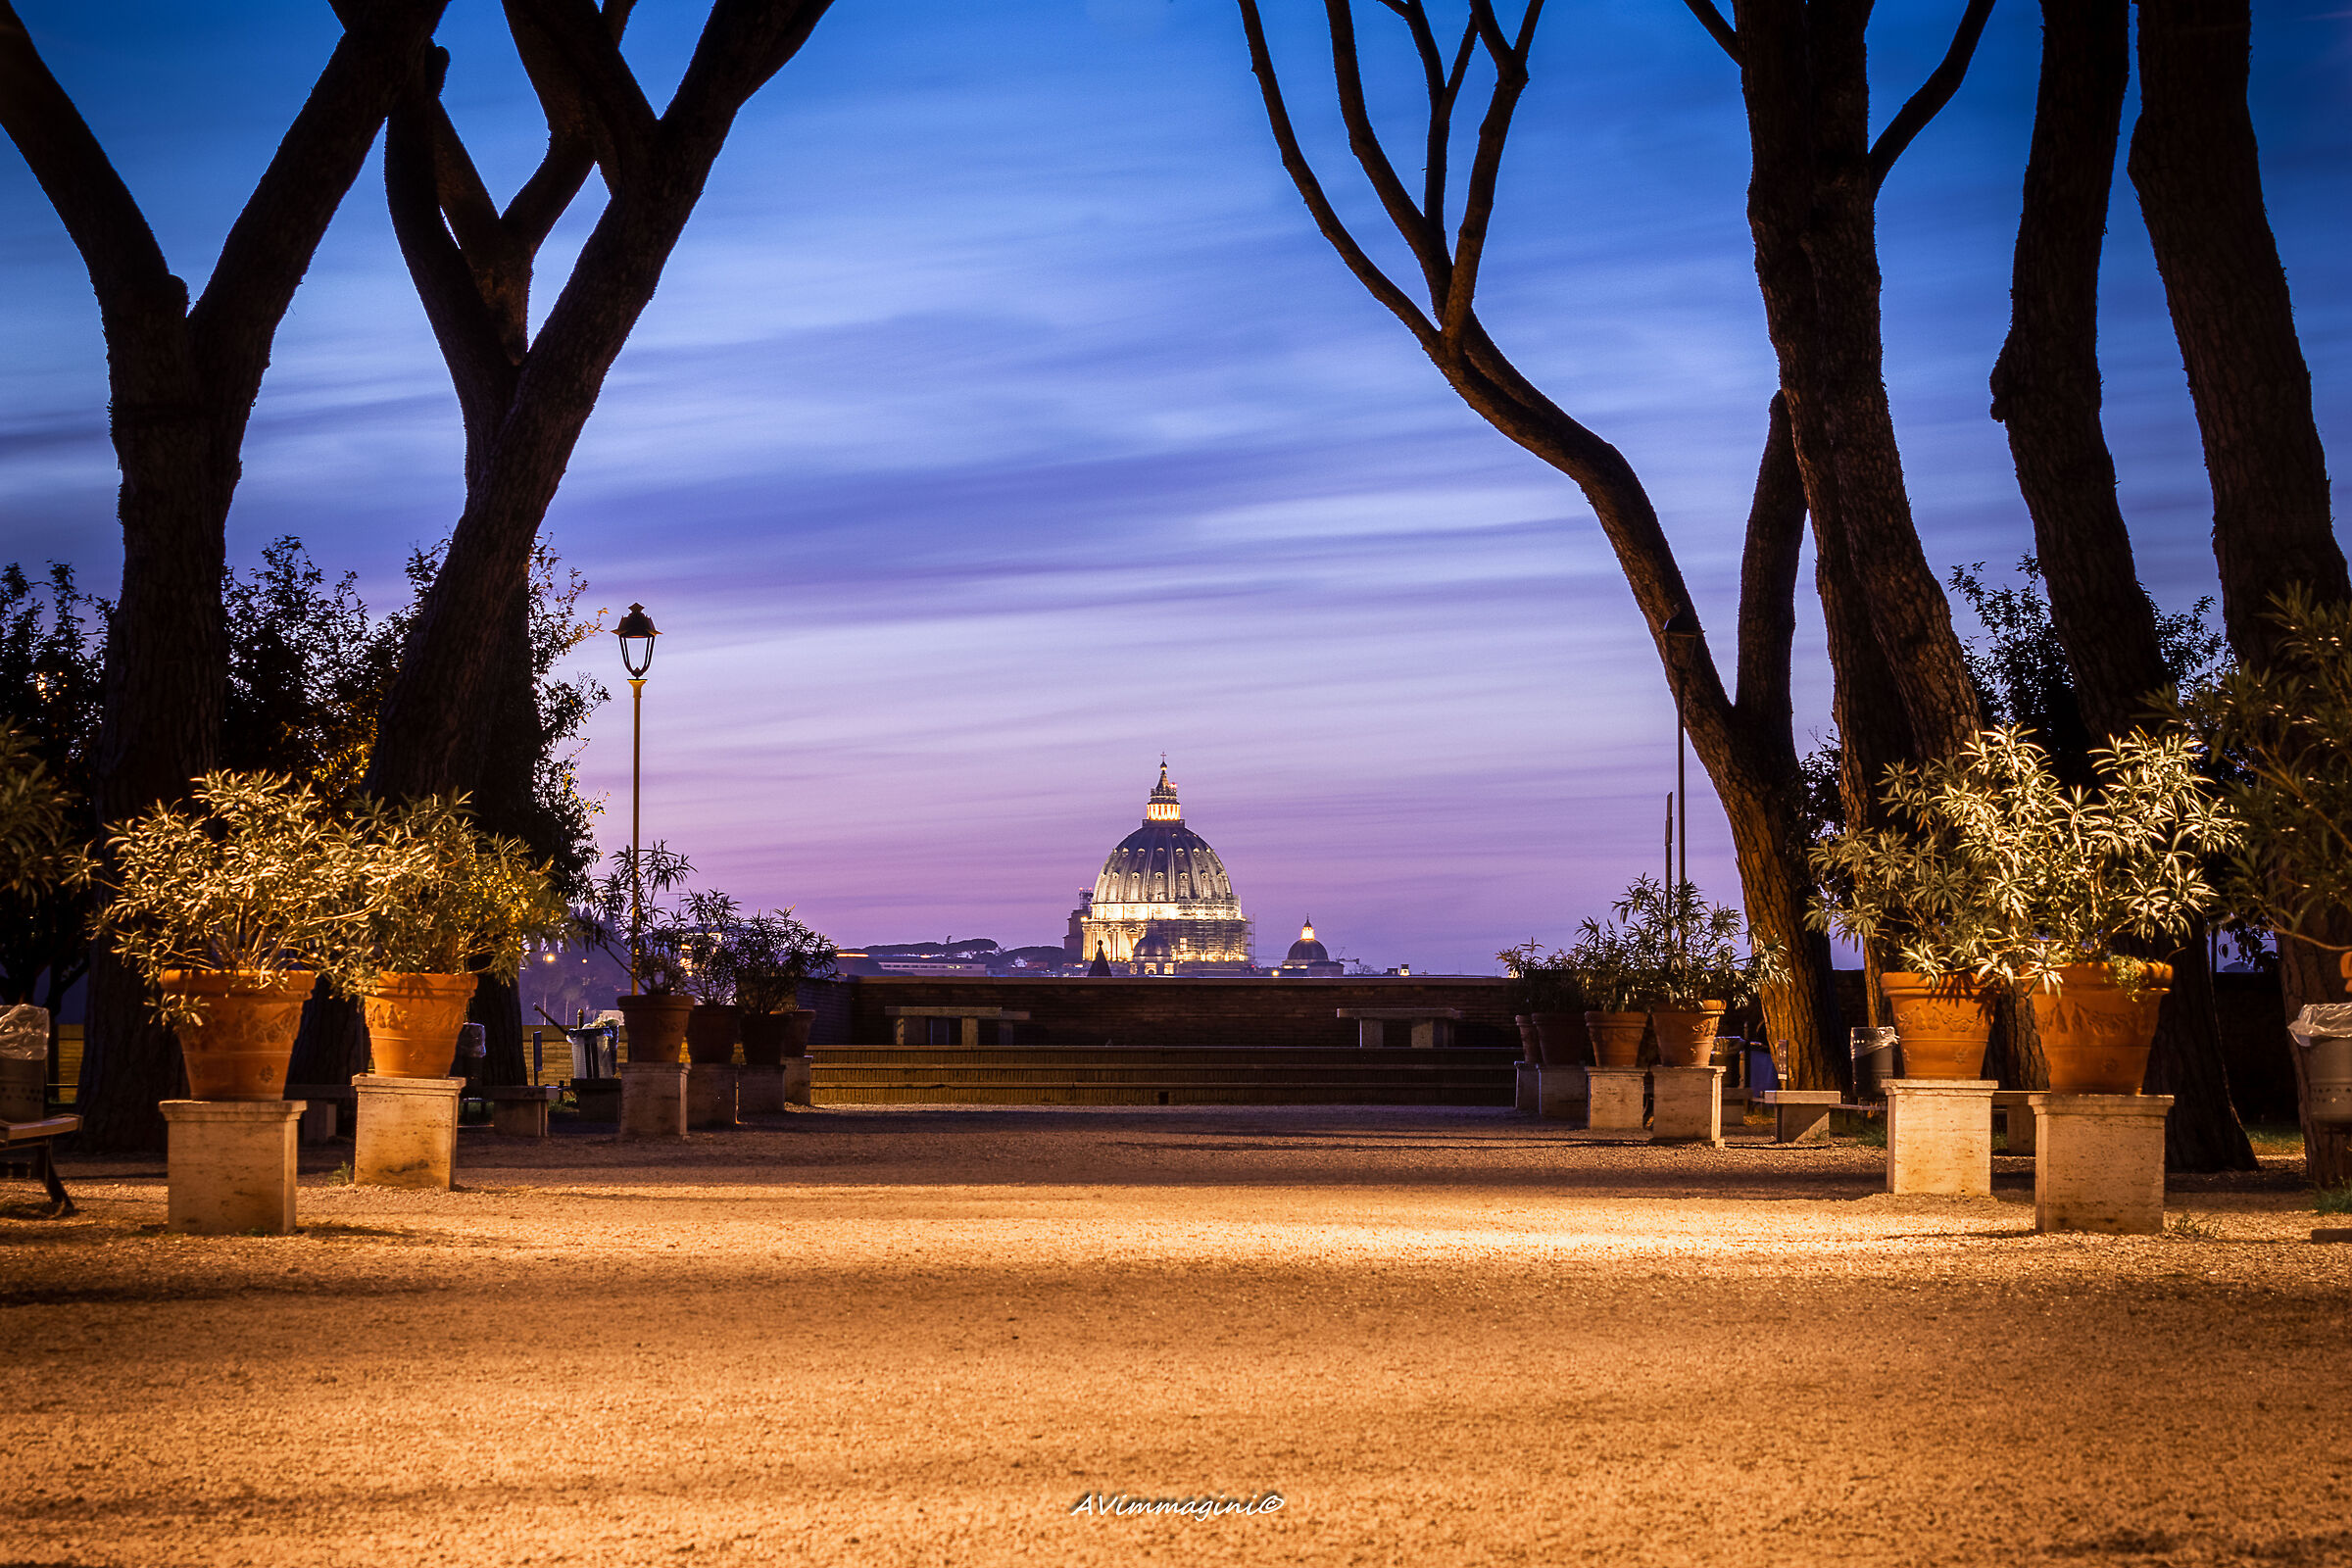 Atmosphere of a sunset in Rome......